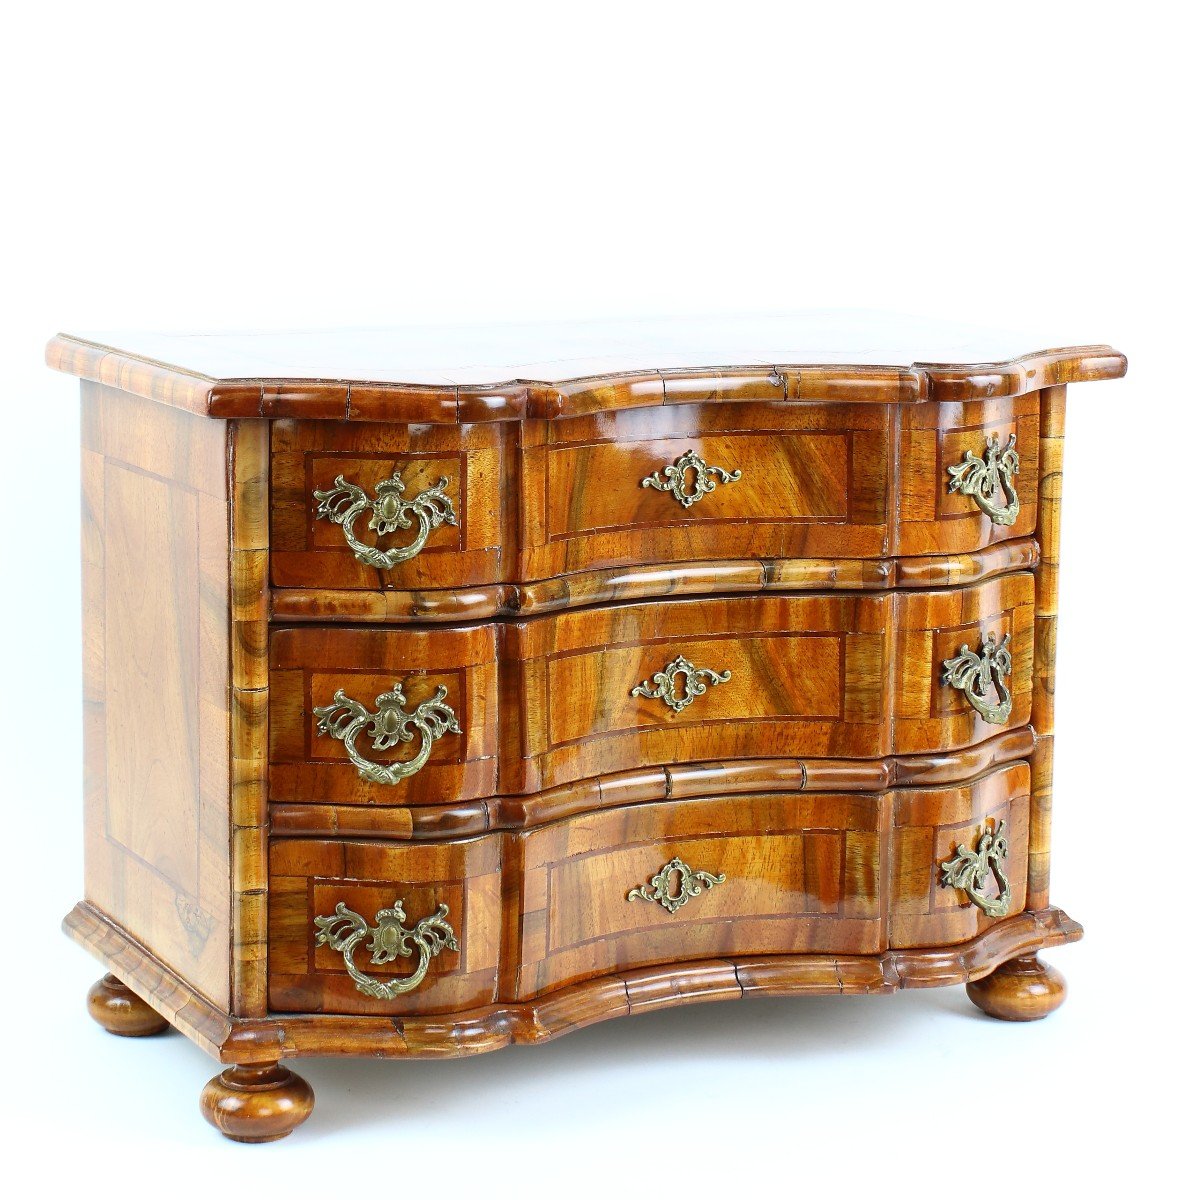 German Saxonian Baroque Style Miniature Walnut Veneer  Chest Of Drawers Or Commode-photo-2